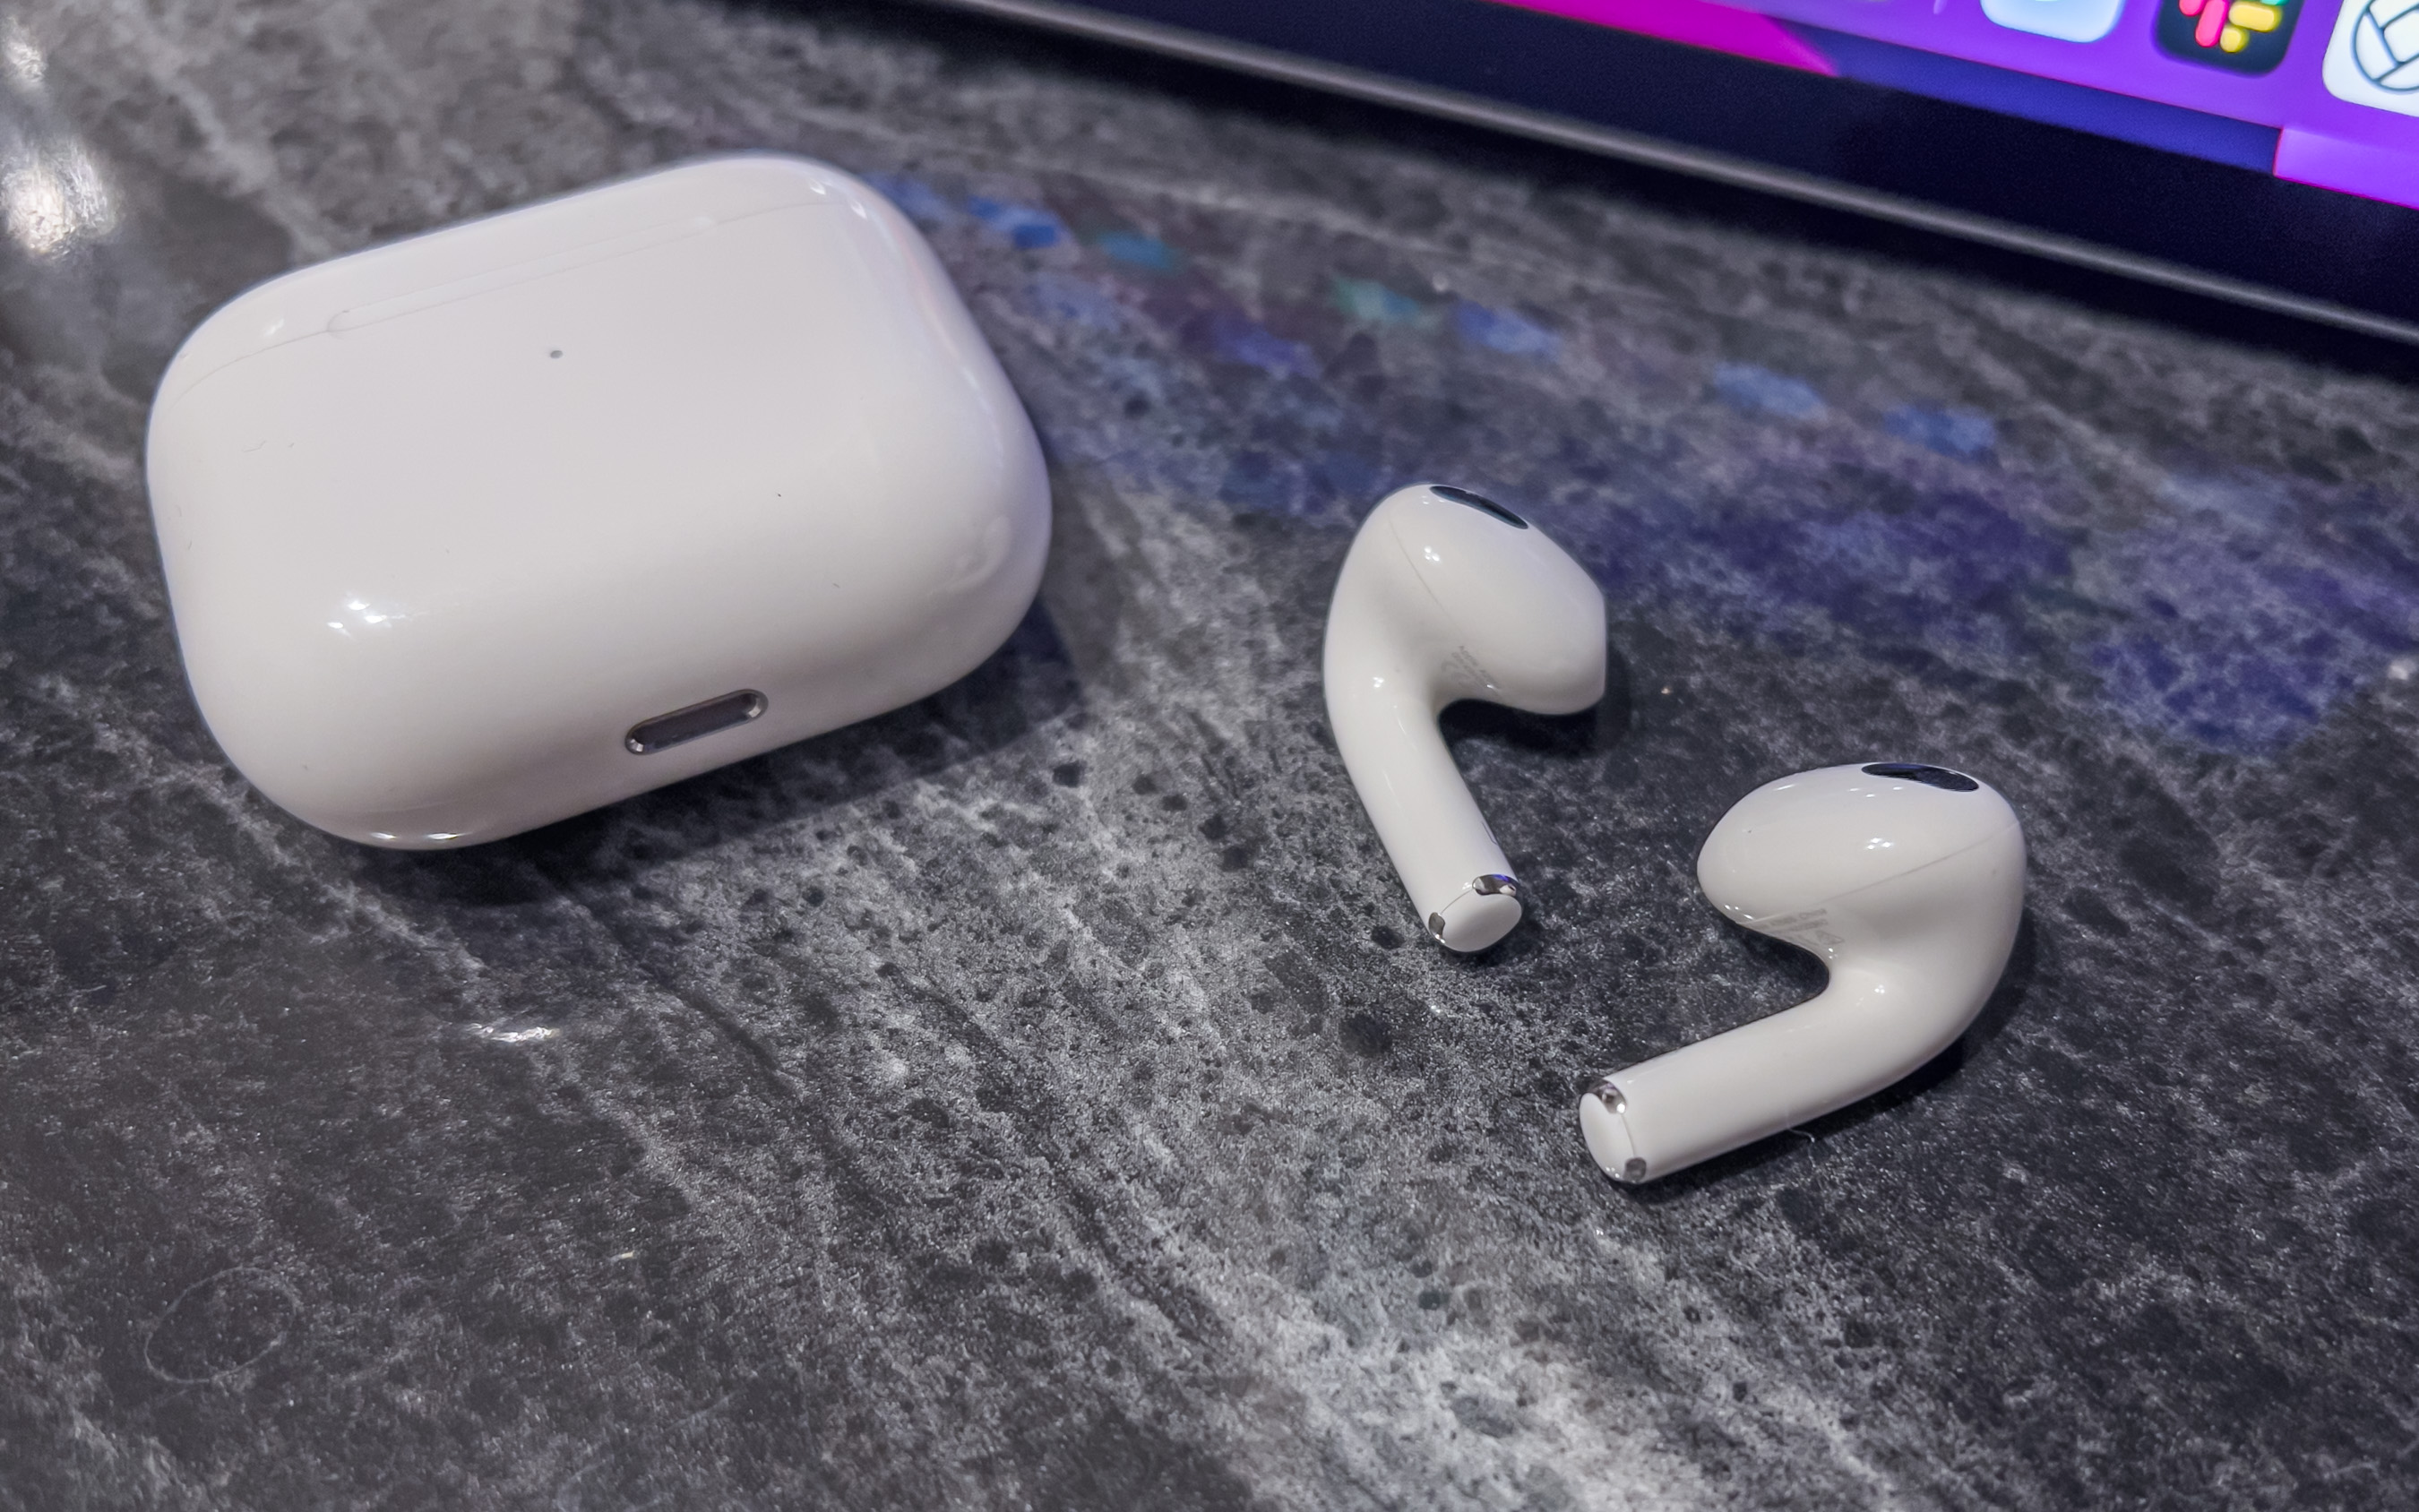 elskerinde guide Smidighed Comment: AirPods 3 from an AirPods Pro user's perspective - 9to5Mac